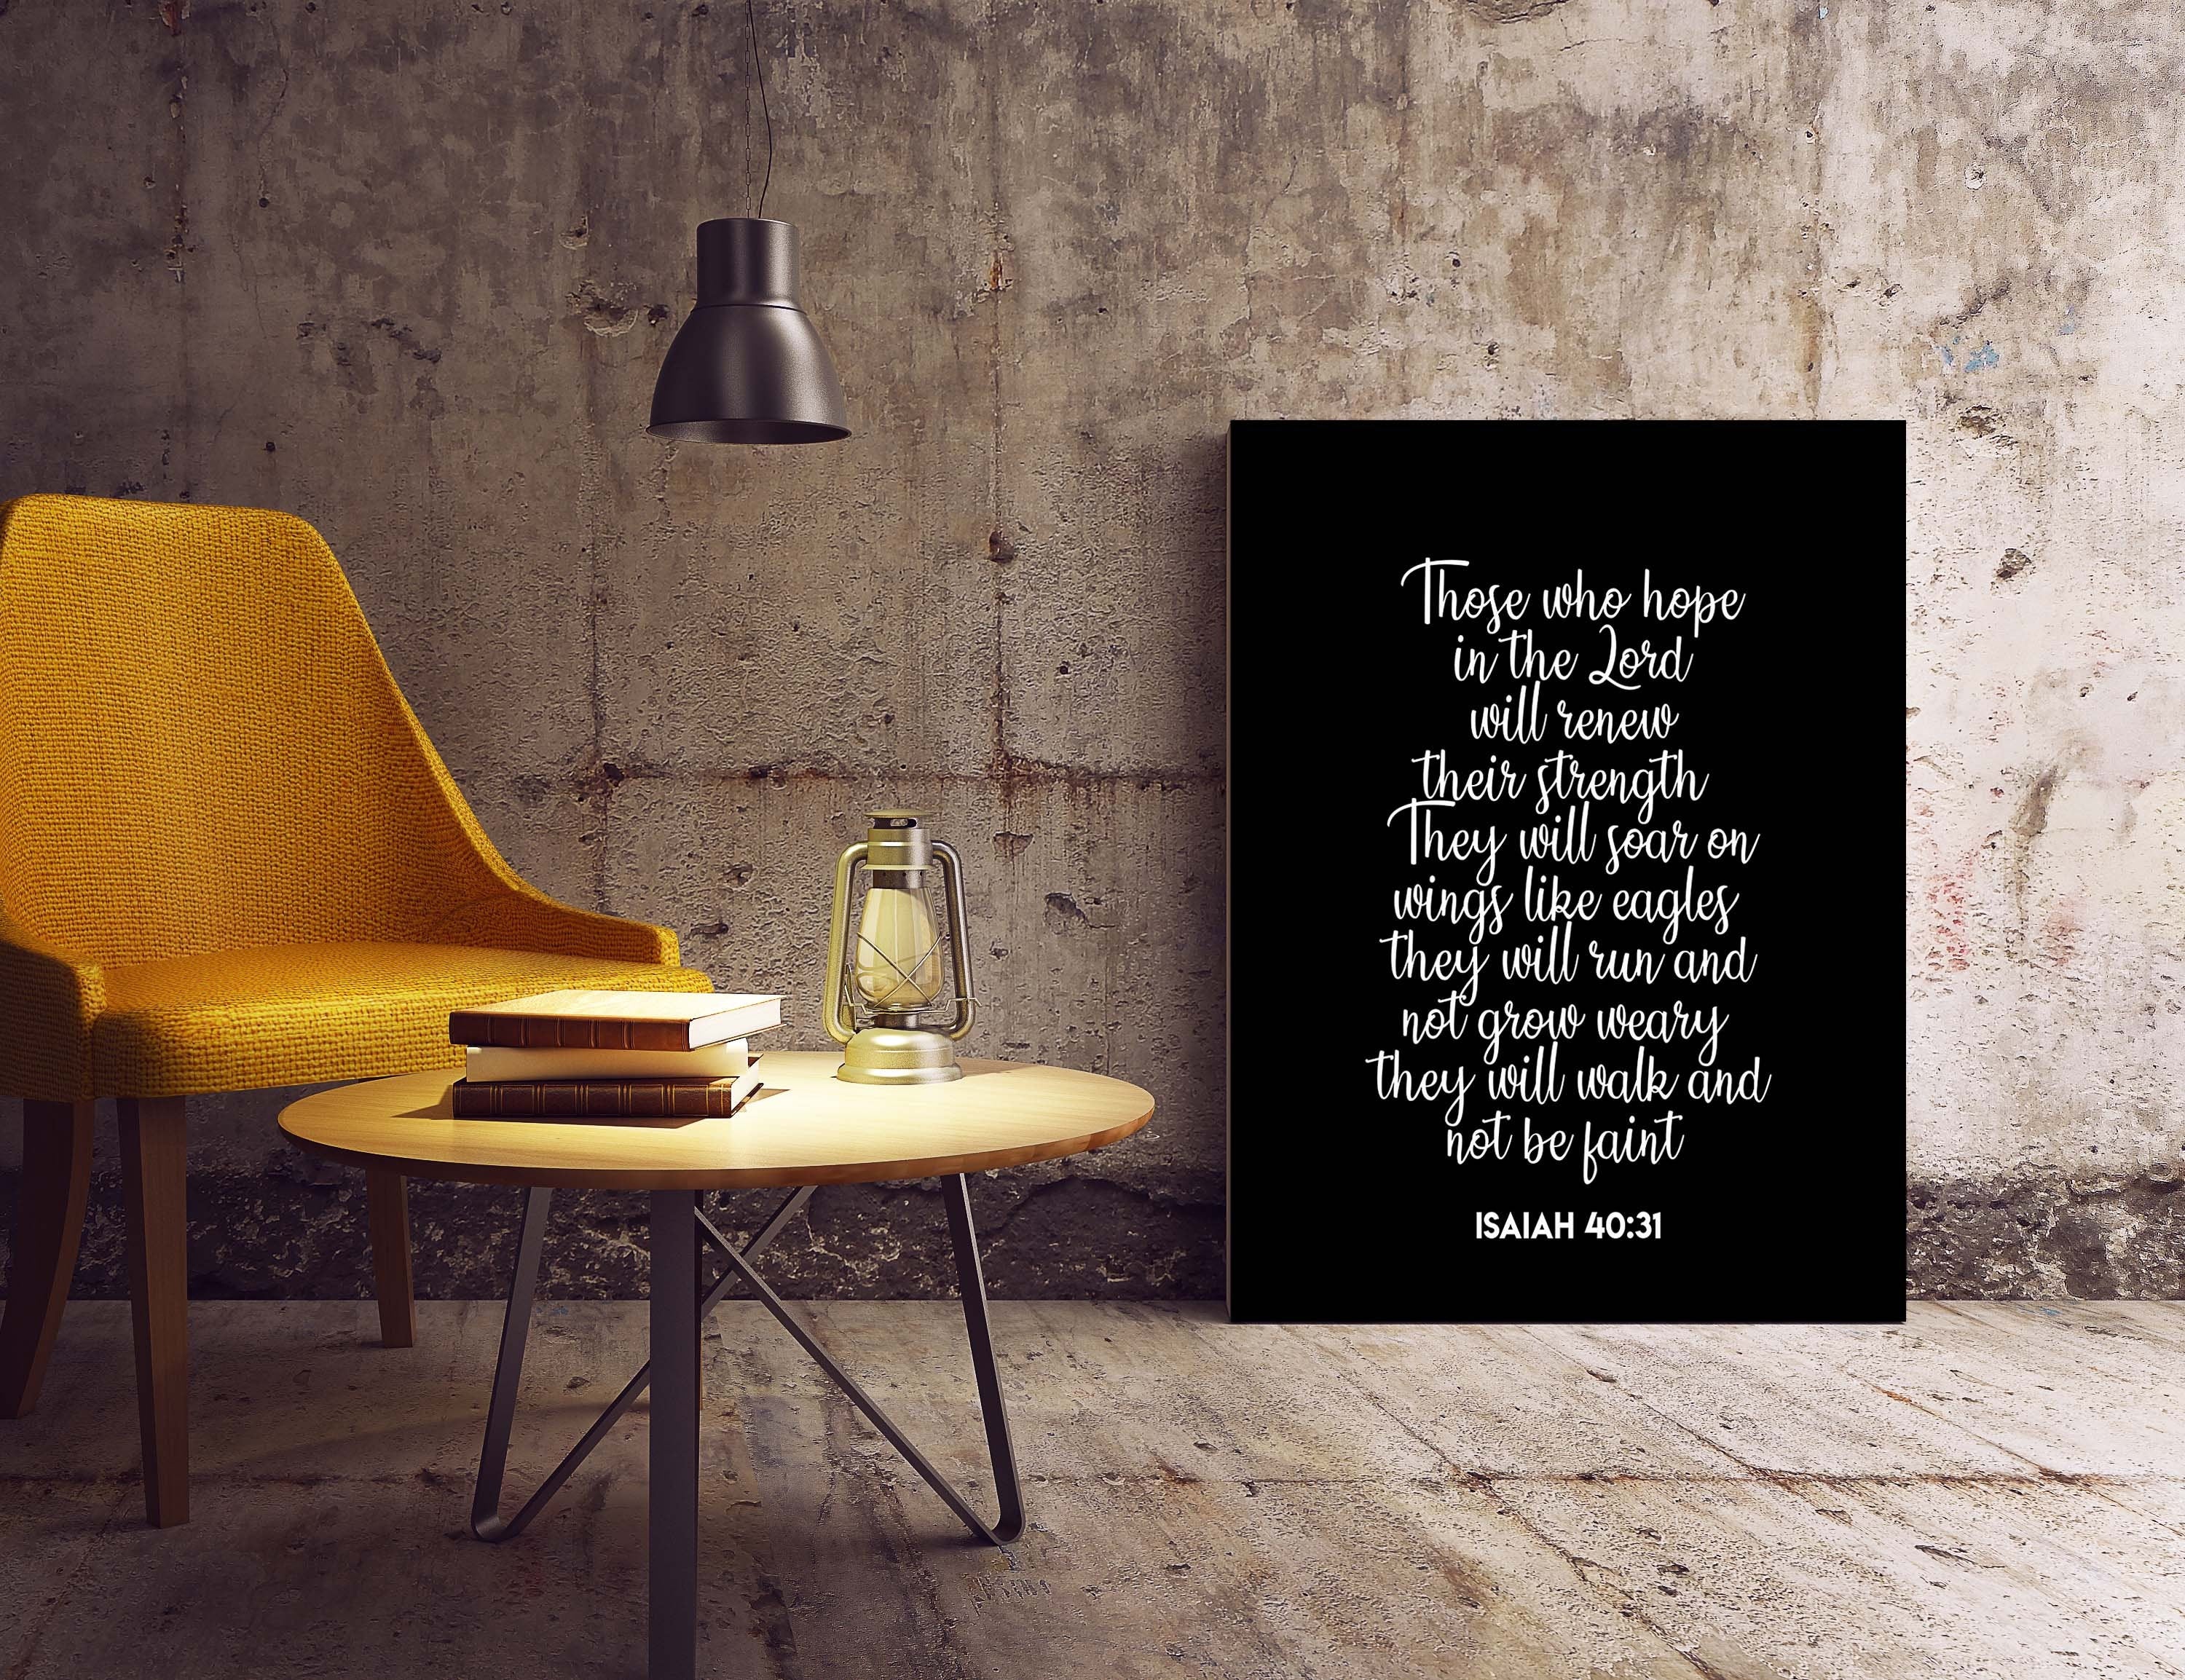 Hope in the LORD Isaiah 40:31 Bible Verse Print, Inspirational Gift Wall Art in Black & White